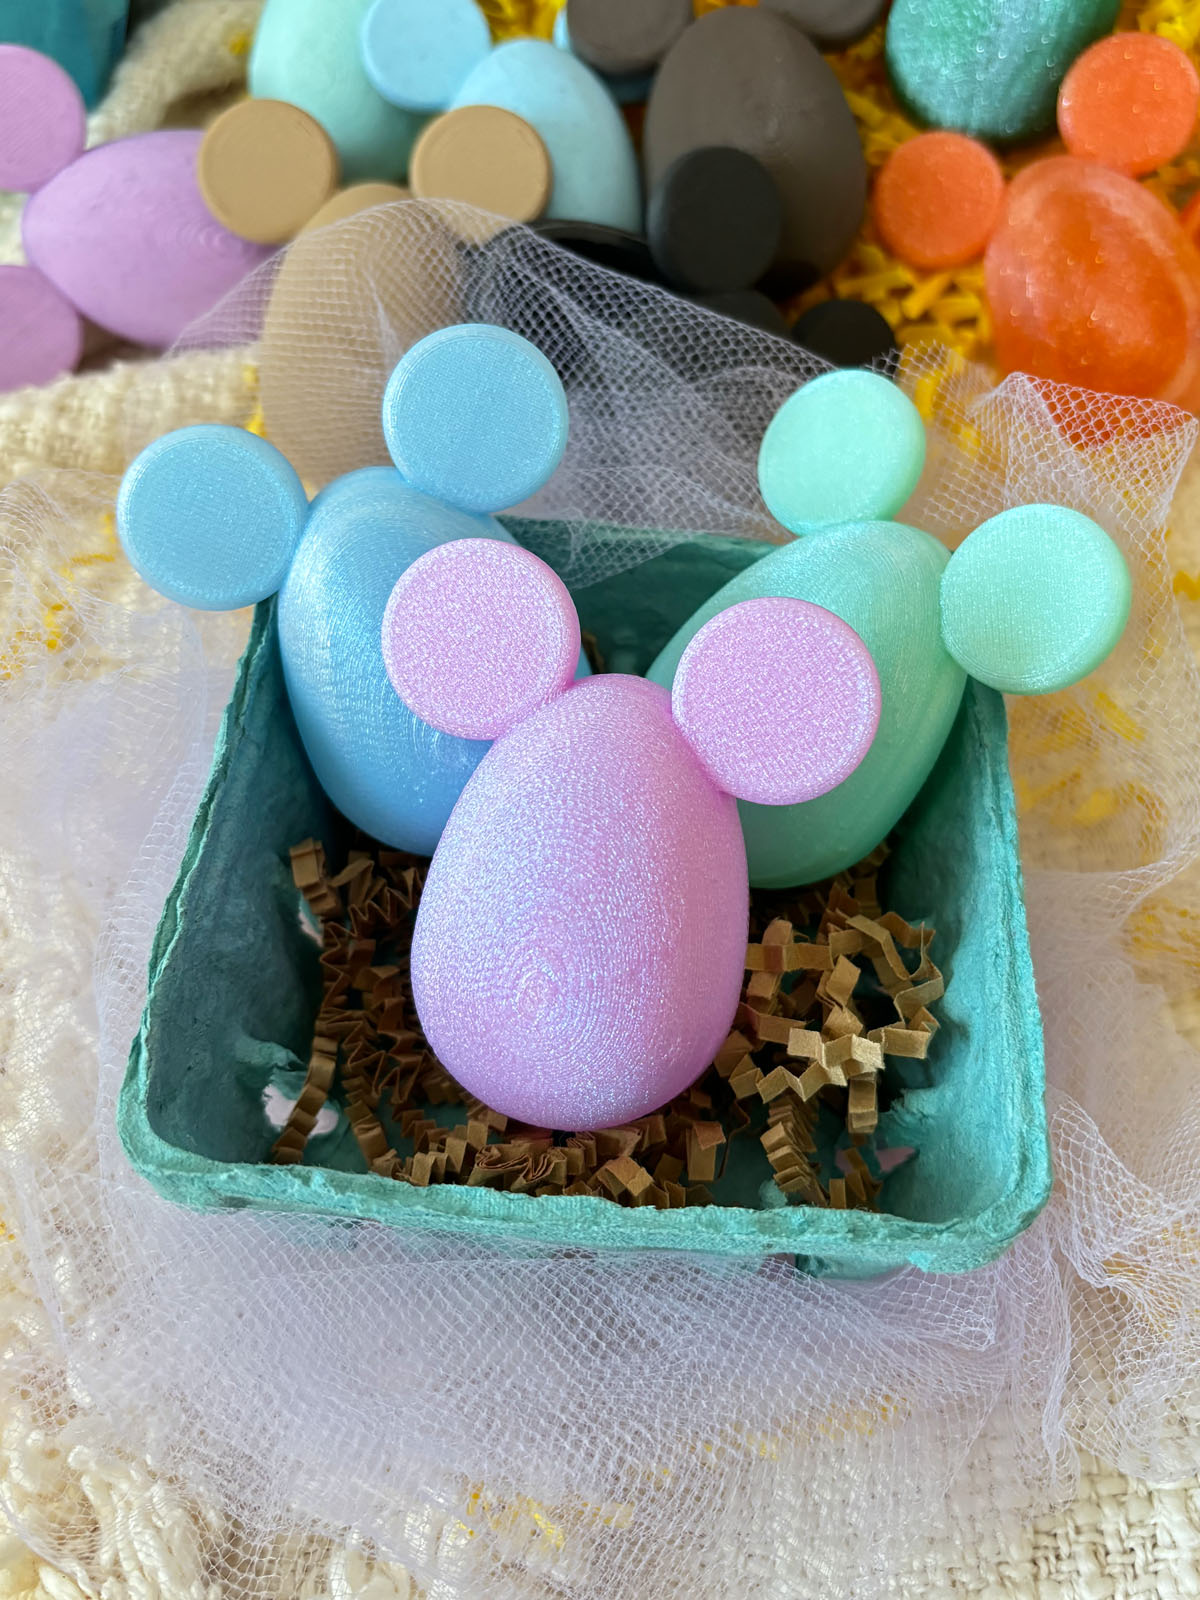 Small Eggs with Ears 3 pc Set